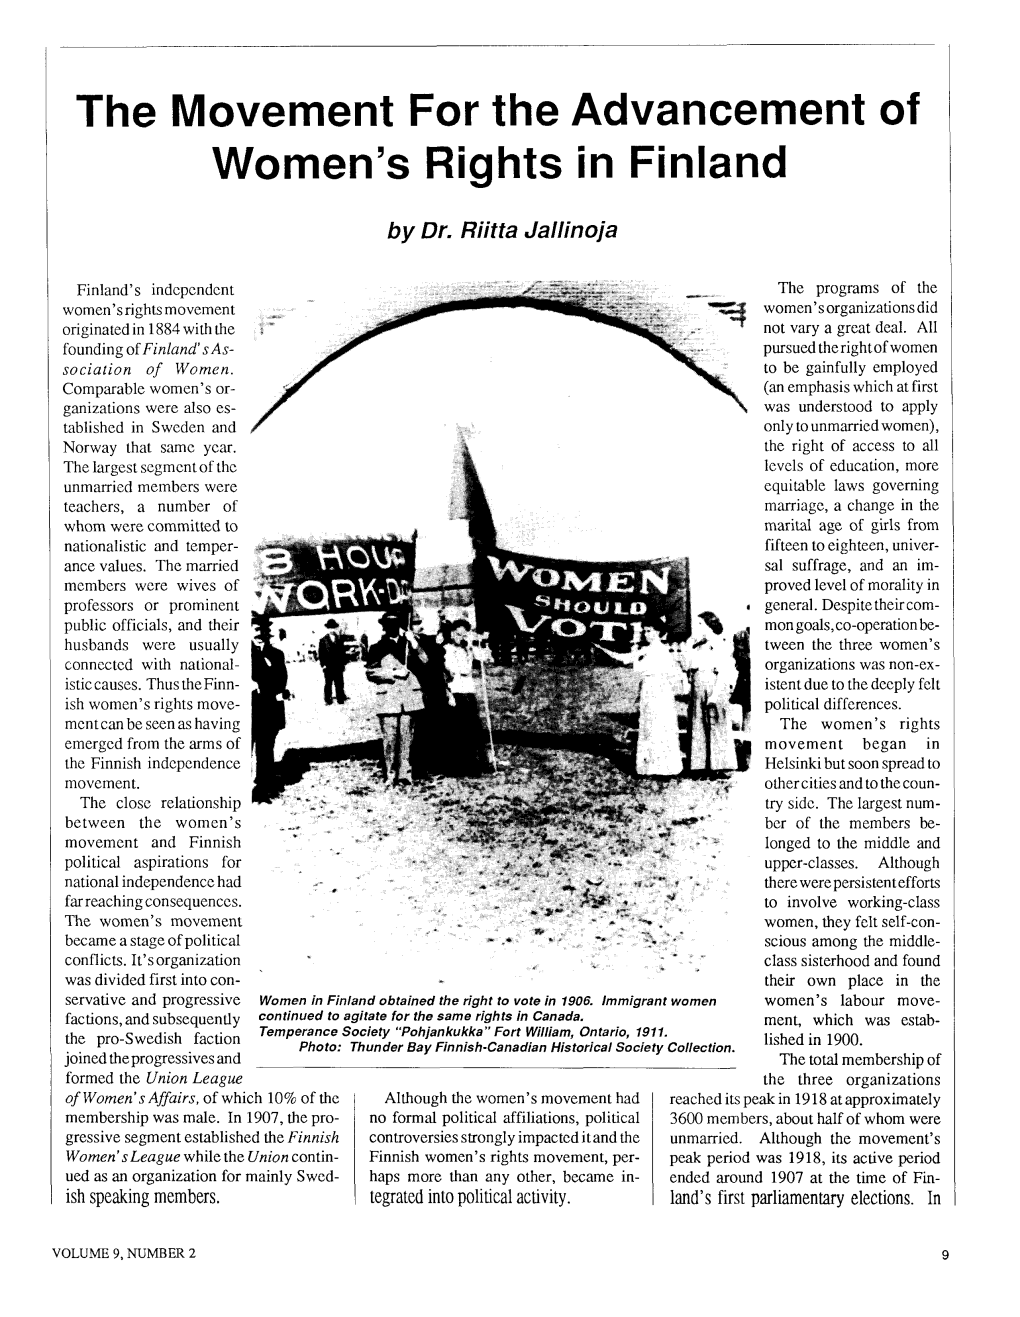 The Movement for the Advancement of Women's Rights in Finland